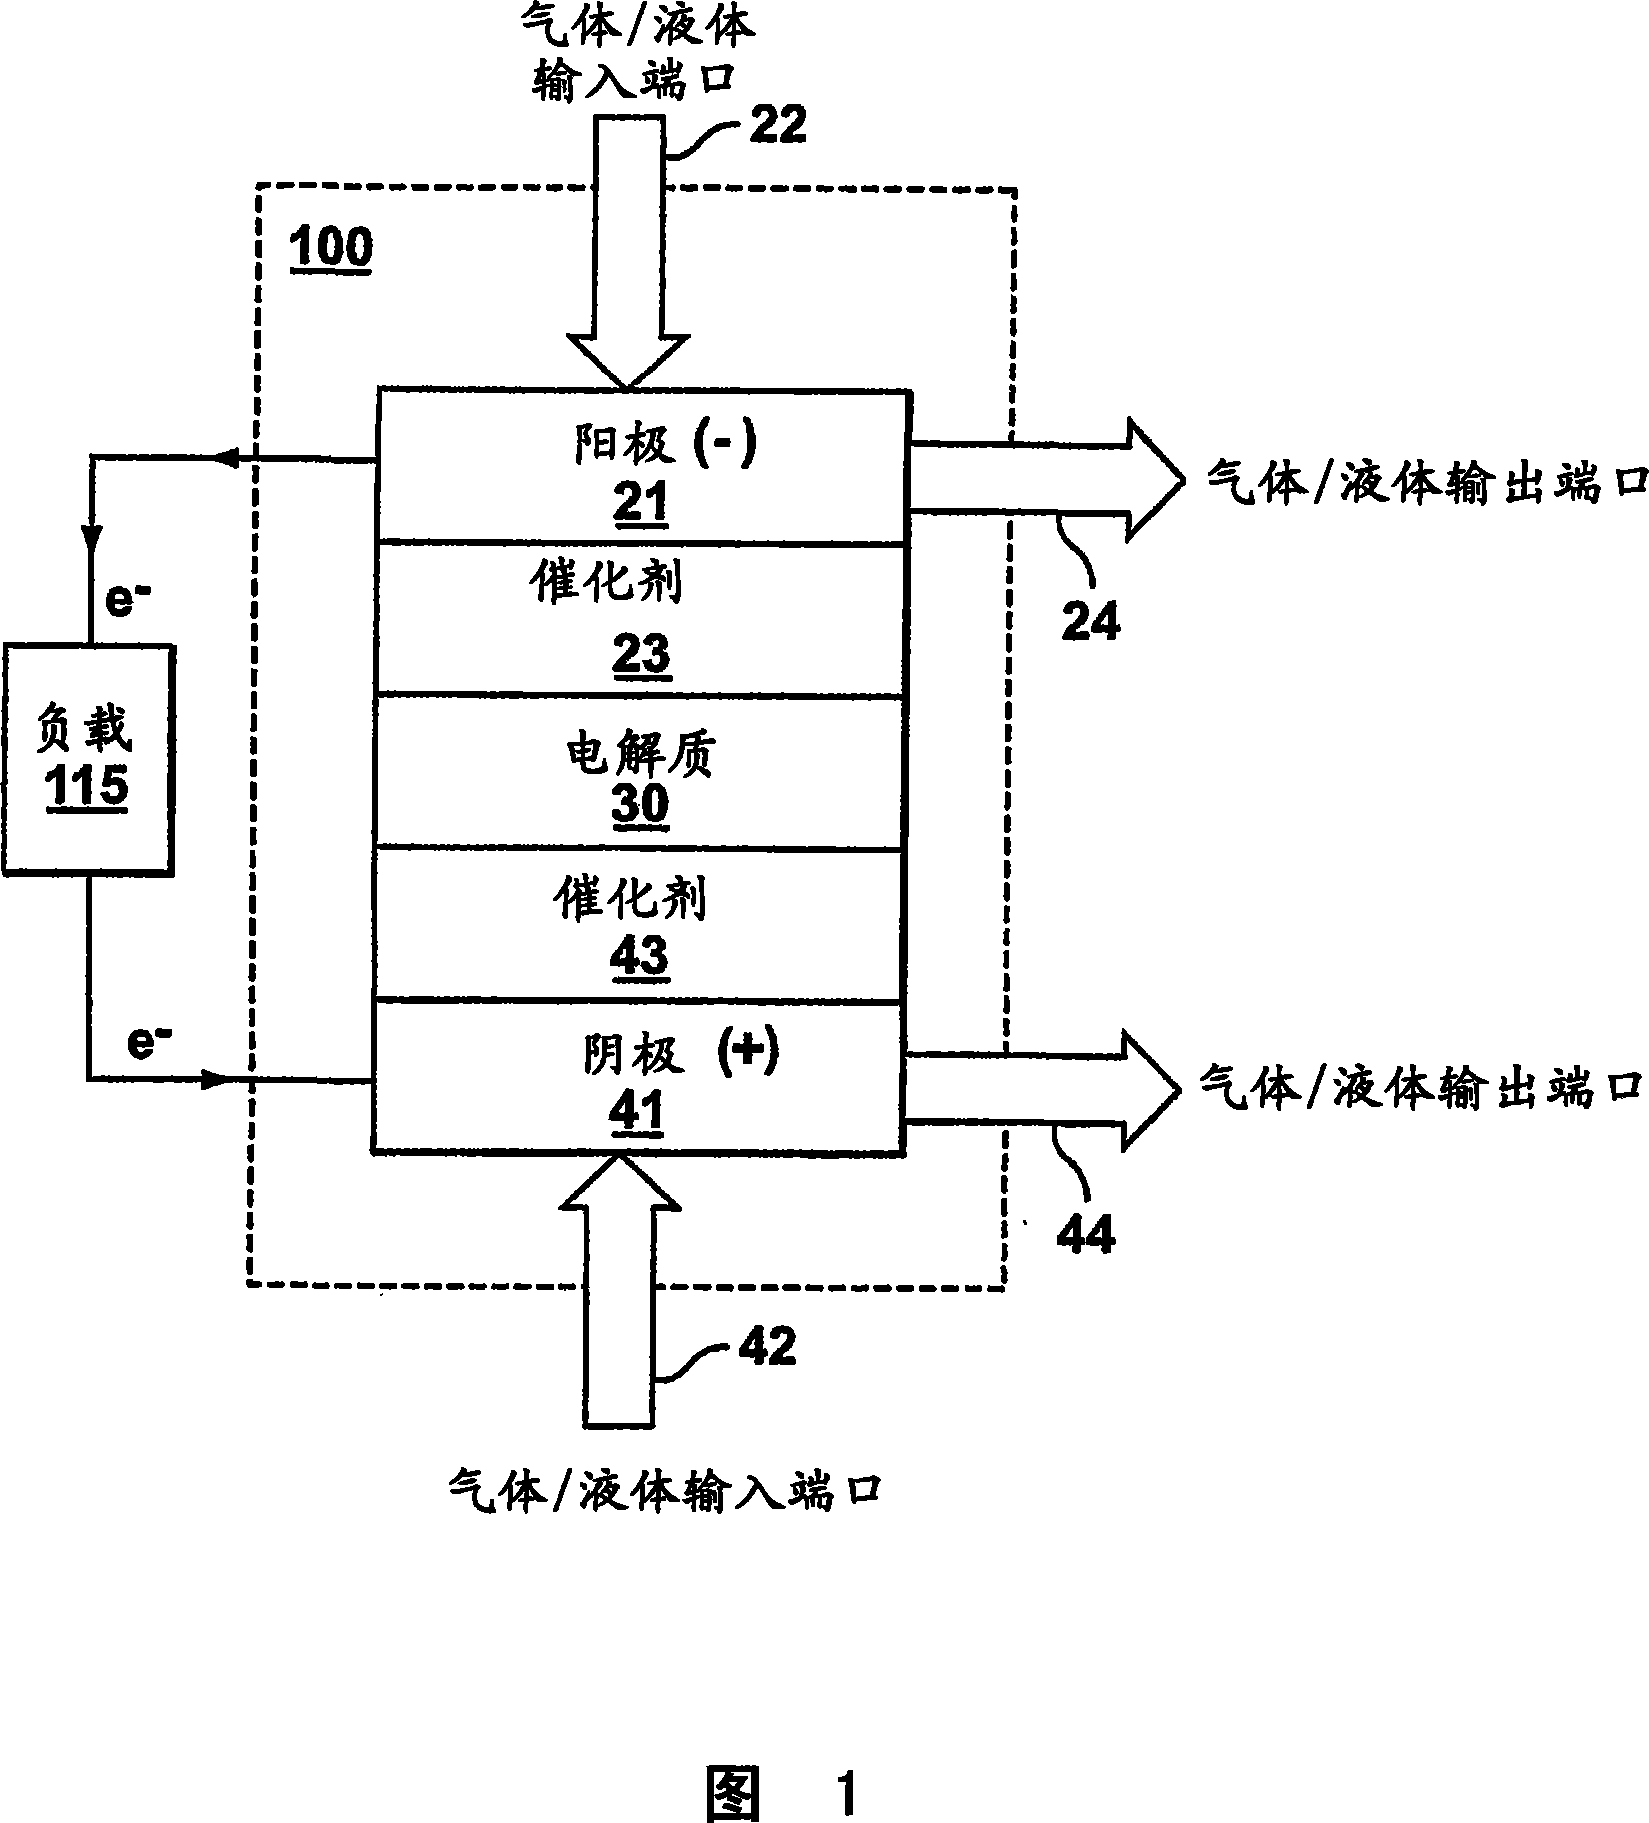 Systems and methods for detecting and indicating fault conditions in electrochemical cells